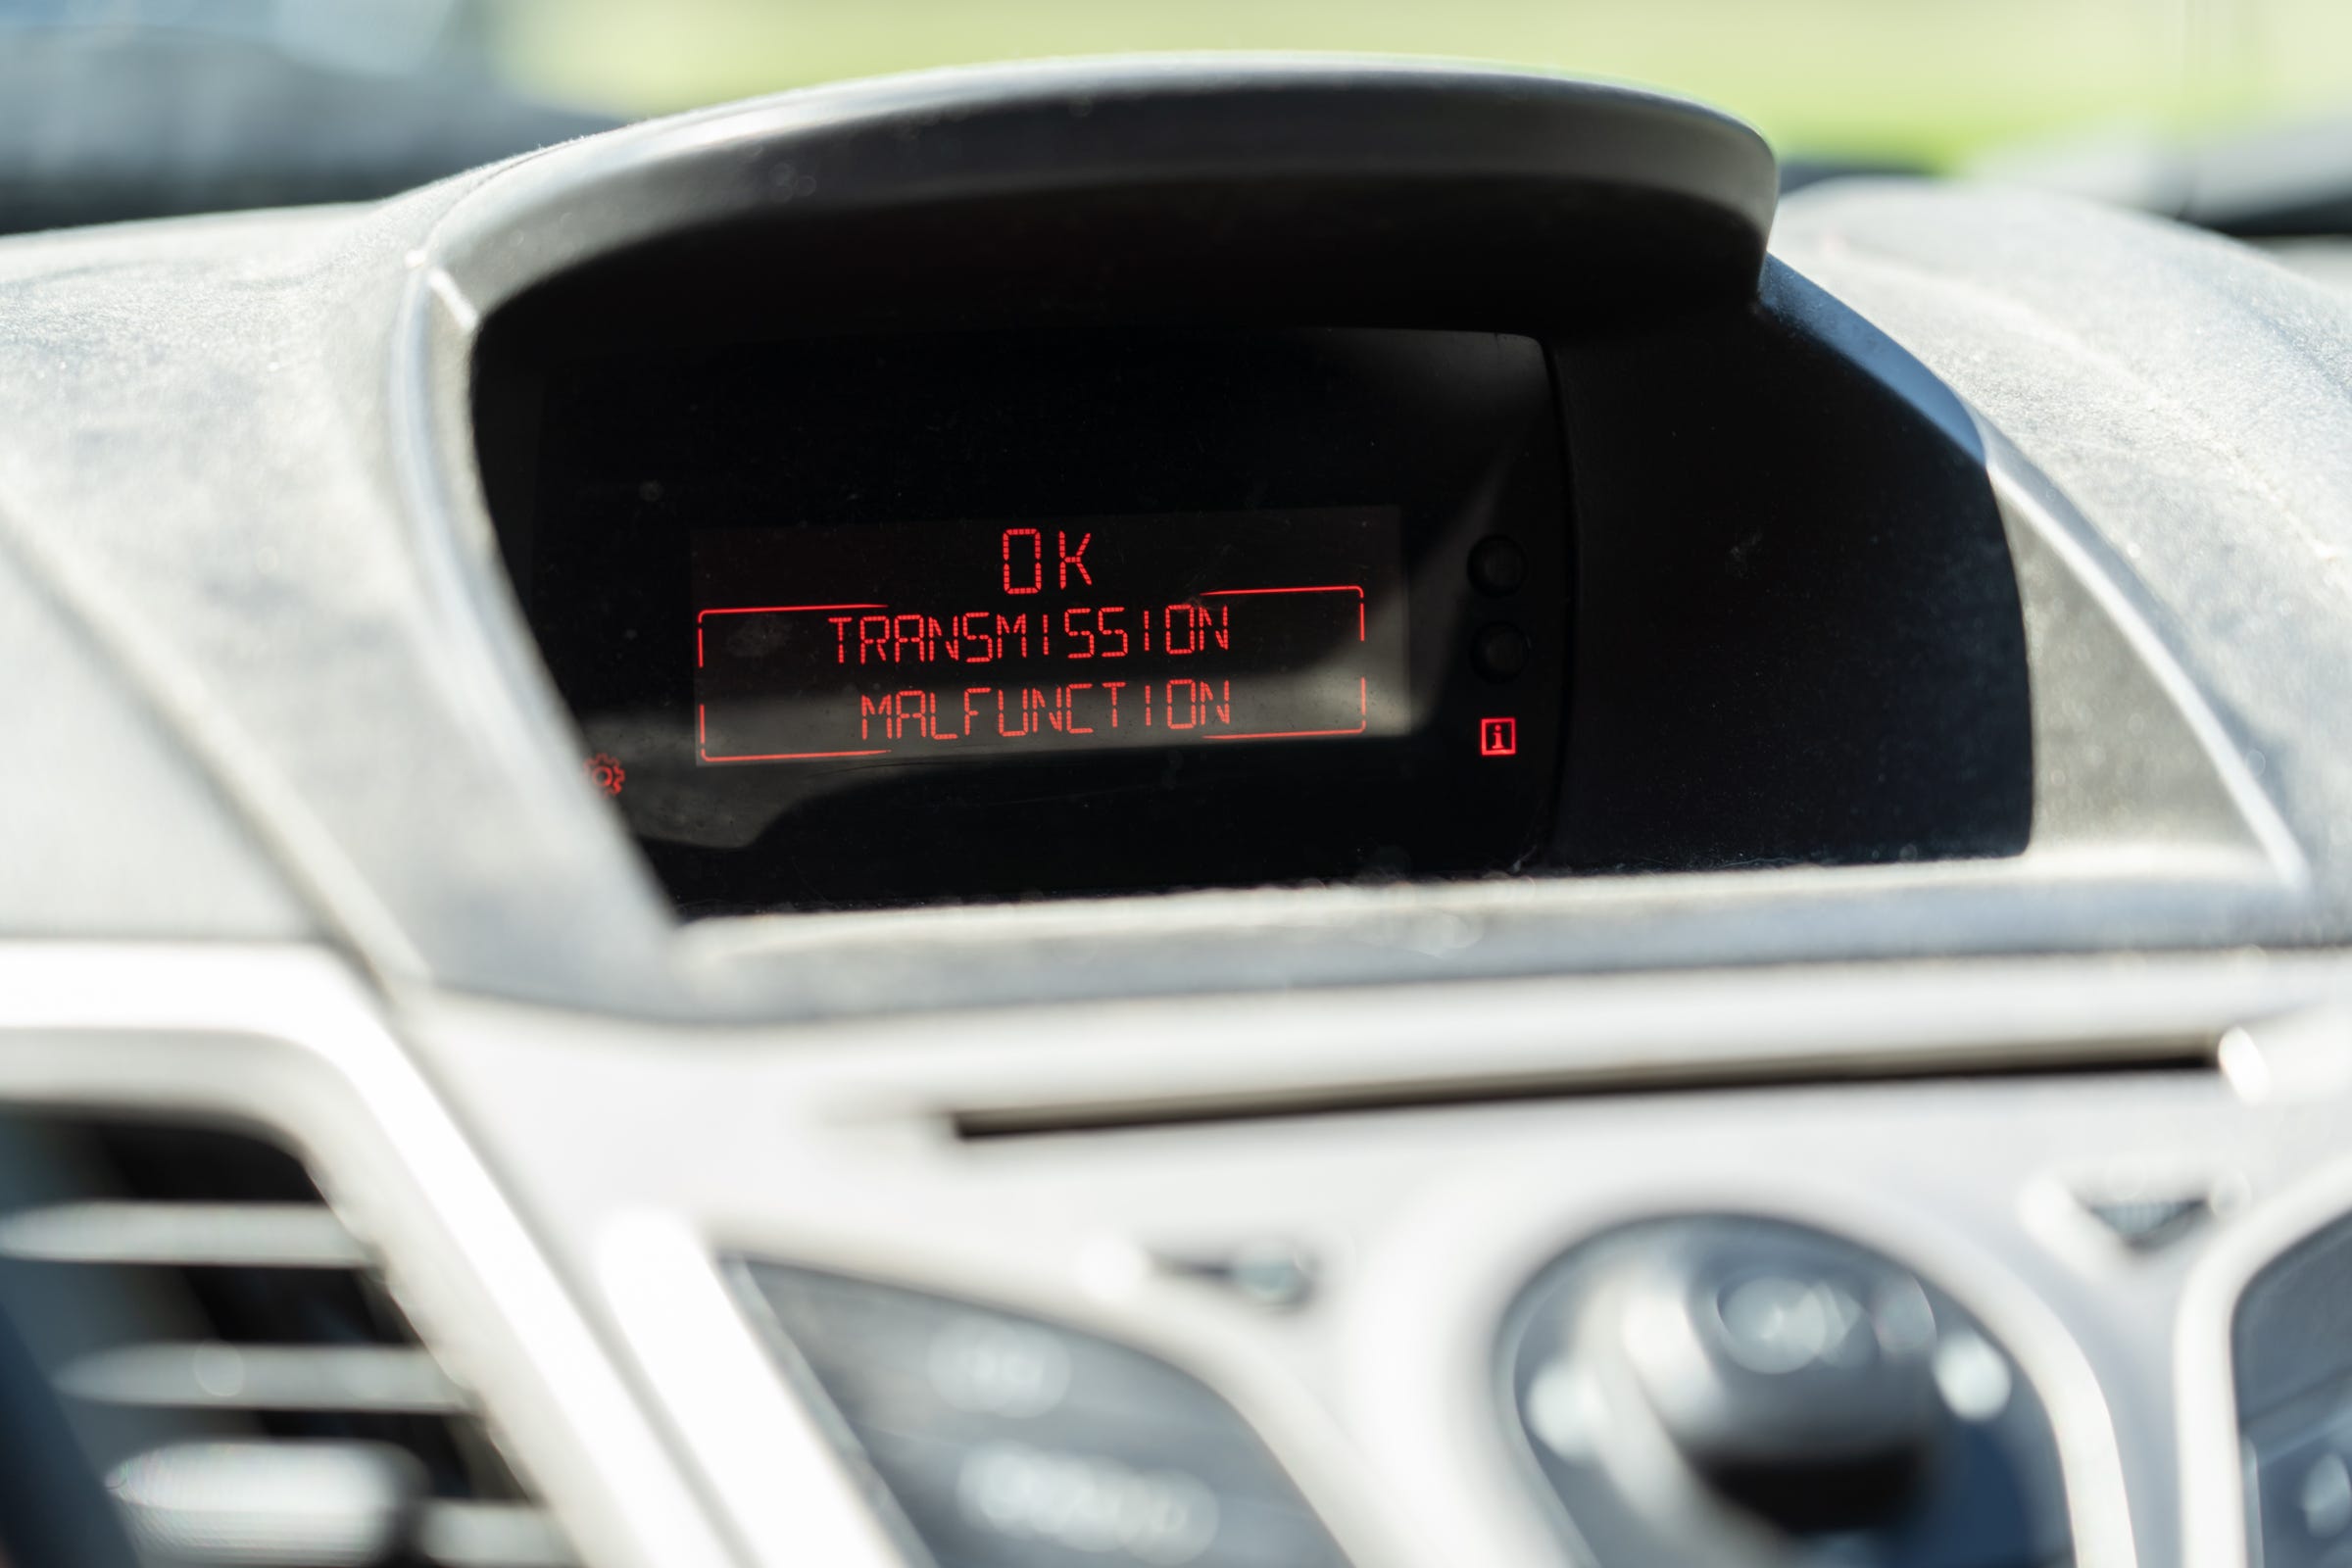 A transmission malfunction message is displayed in Michelle Hughes' 2012 Ford Fiesta parked at her home in Flint on Wednesday, June 26, 2019.